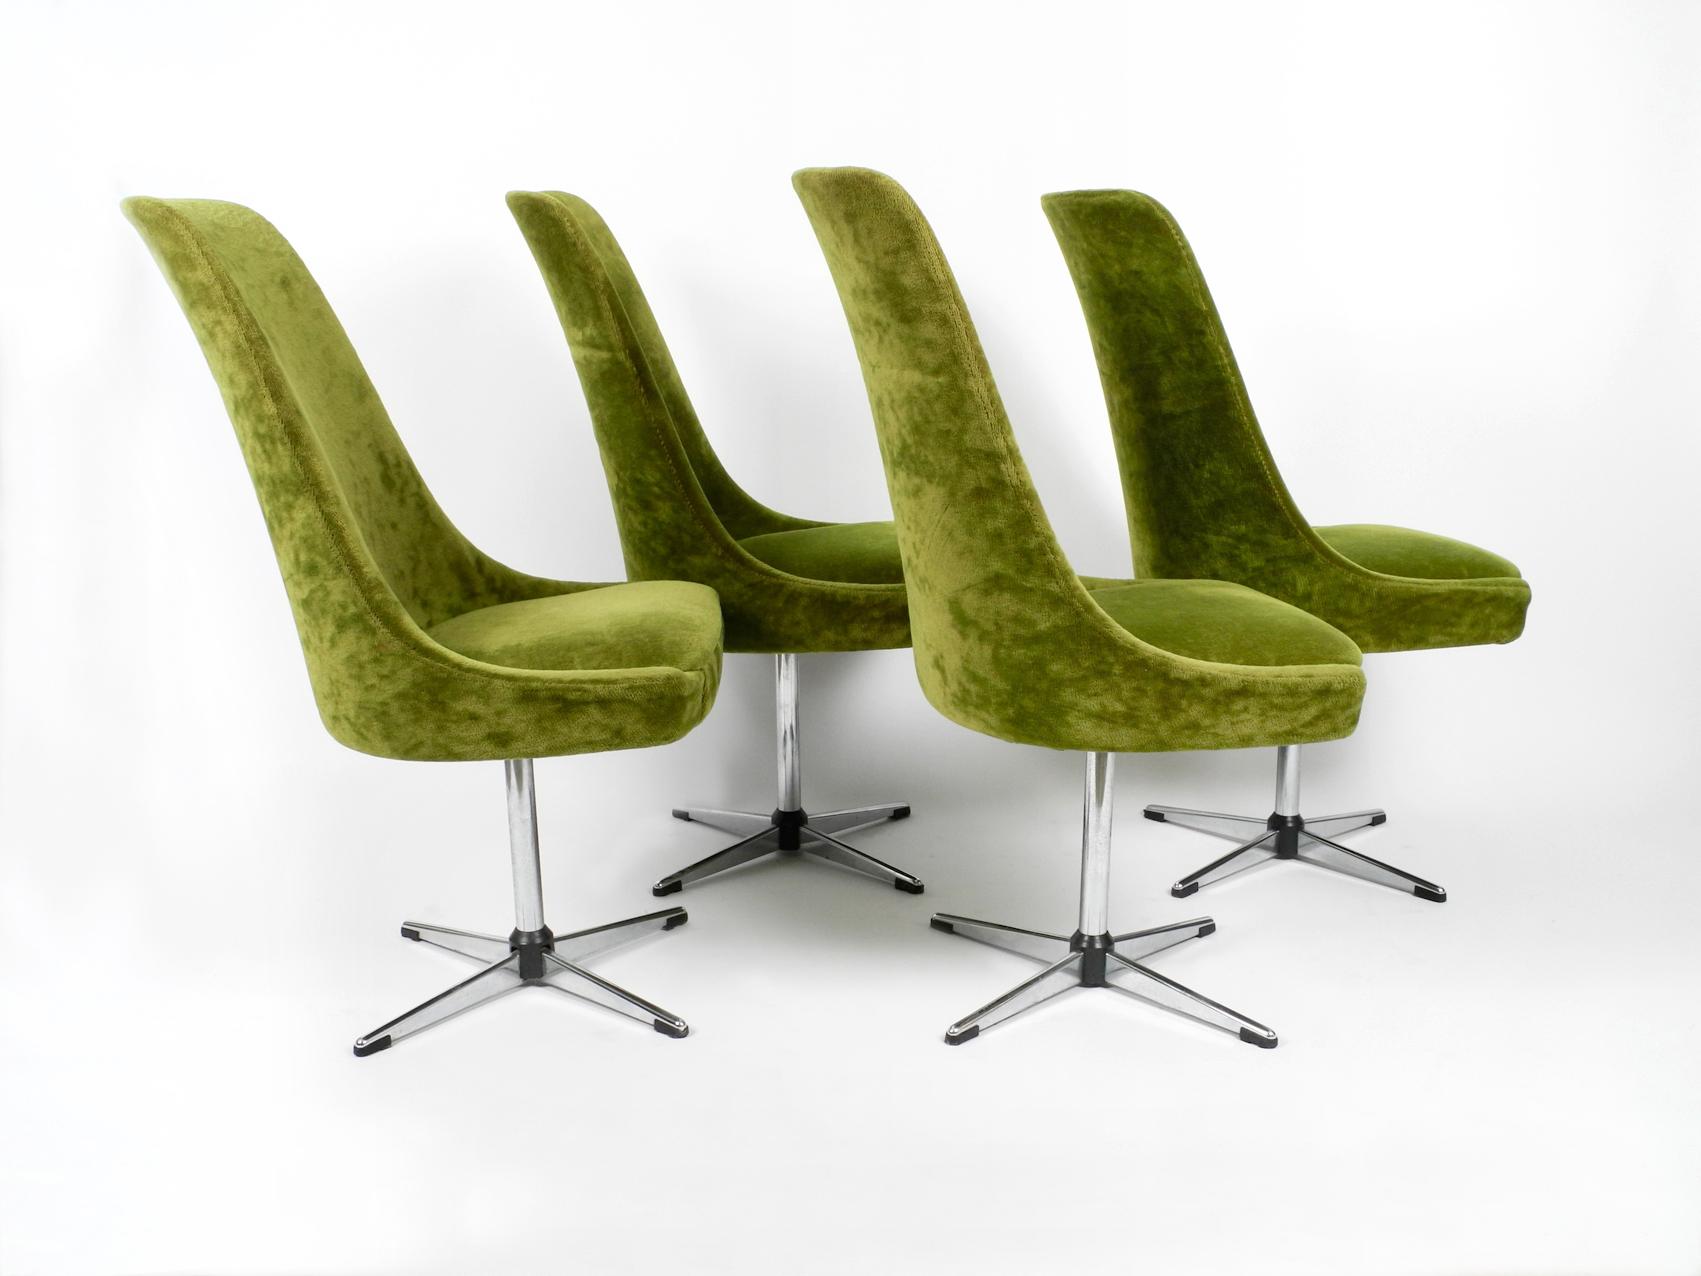 Four original 1970s Pop Art Space Age rotatable chairs by Lübke. Original with green velvet cover. Very good vintage condition without signs of wear. Apparently they have barely been used. Minimal traces of storage.
Plywood wood frame covered in